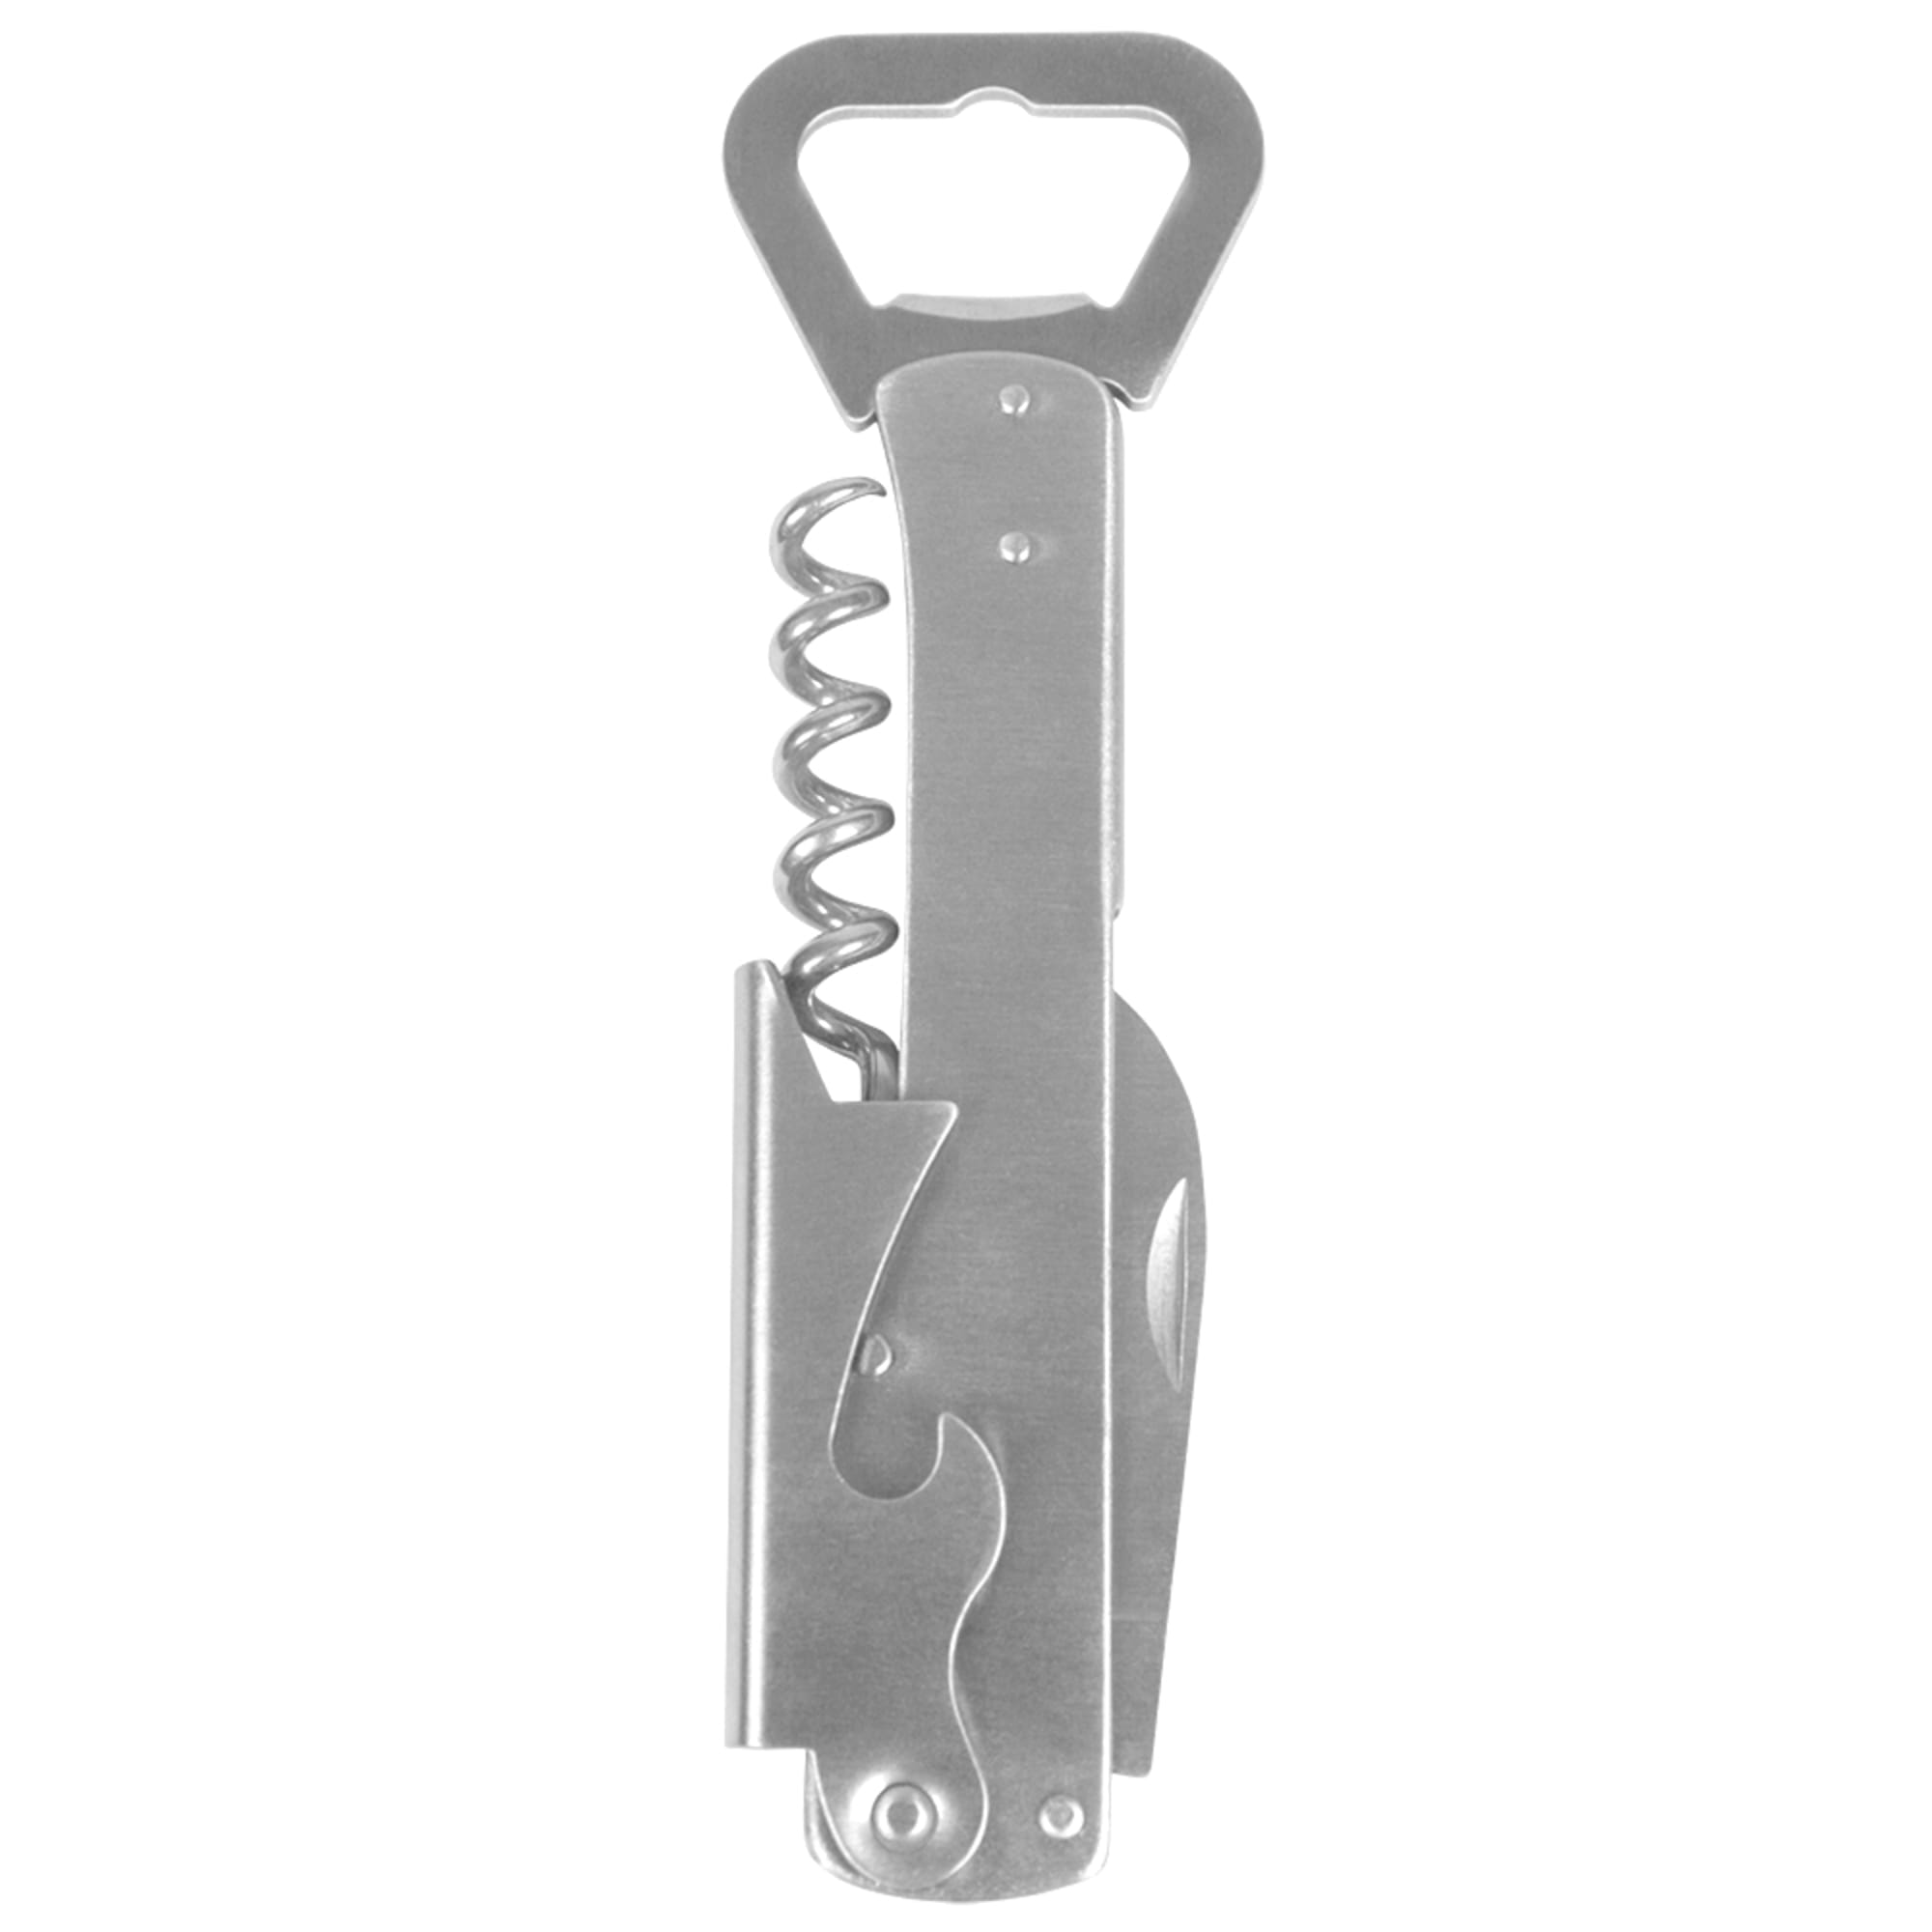 Home Basics All-in-One Stainless Steel Corkscrew Bottle Opener with Foil Cutter $2.00 EACH, CASE PACK OF 24